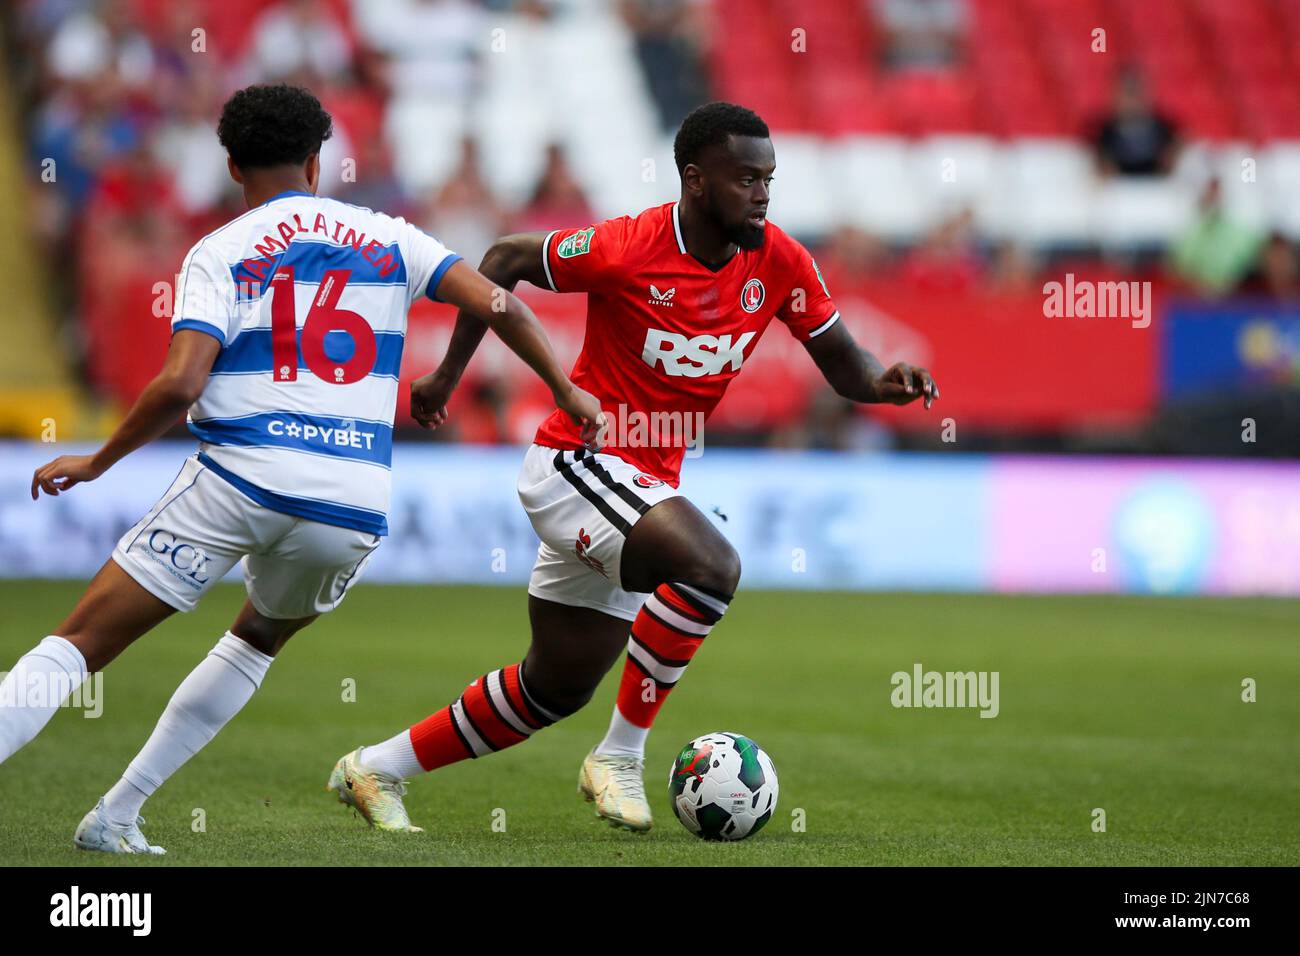 The Valley, London on Tuesday 9th August 2022. Diallang Jaiyesimi of Charlton Athletic on the ball during the Carabao Cup match between Charlton Athletic and Queens Park Rangers at The Valley, London on Tuesday 9th August 2022. (Credit: Tom West | MI News) Credit: MI News & Sport /Alamy Live News Stock Photo